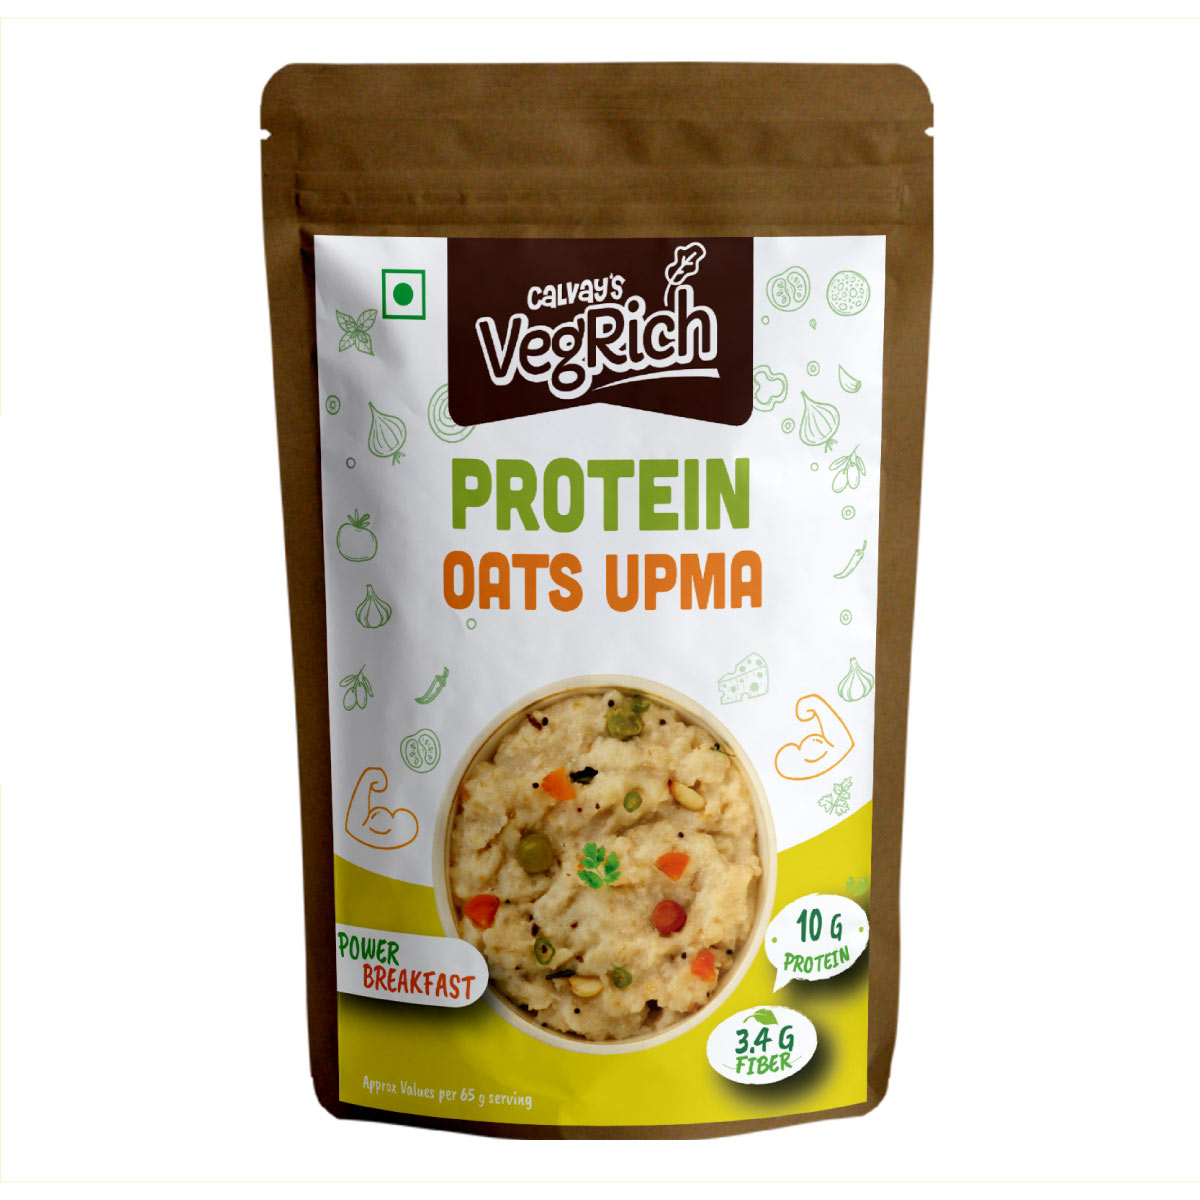 calvays protein oats upma front view white background